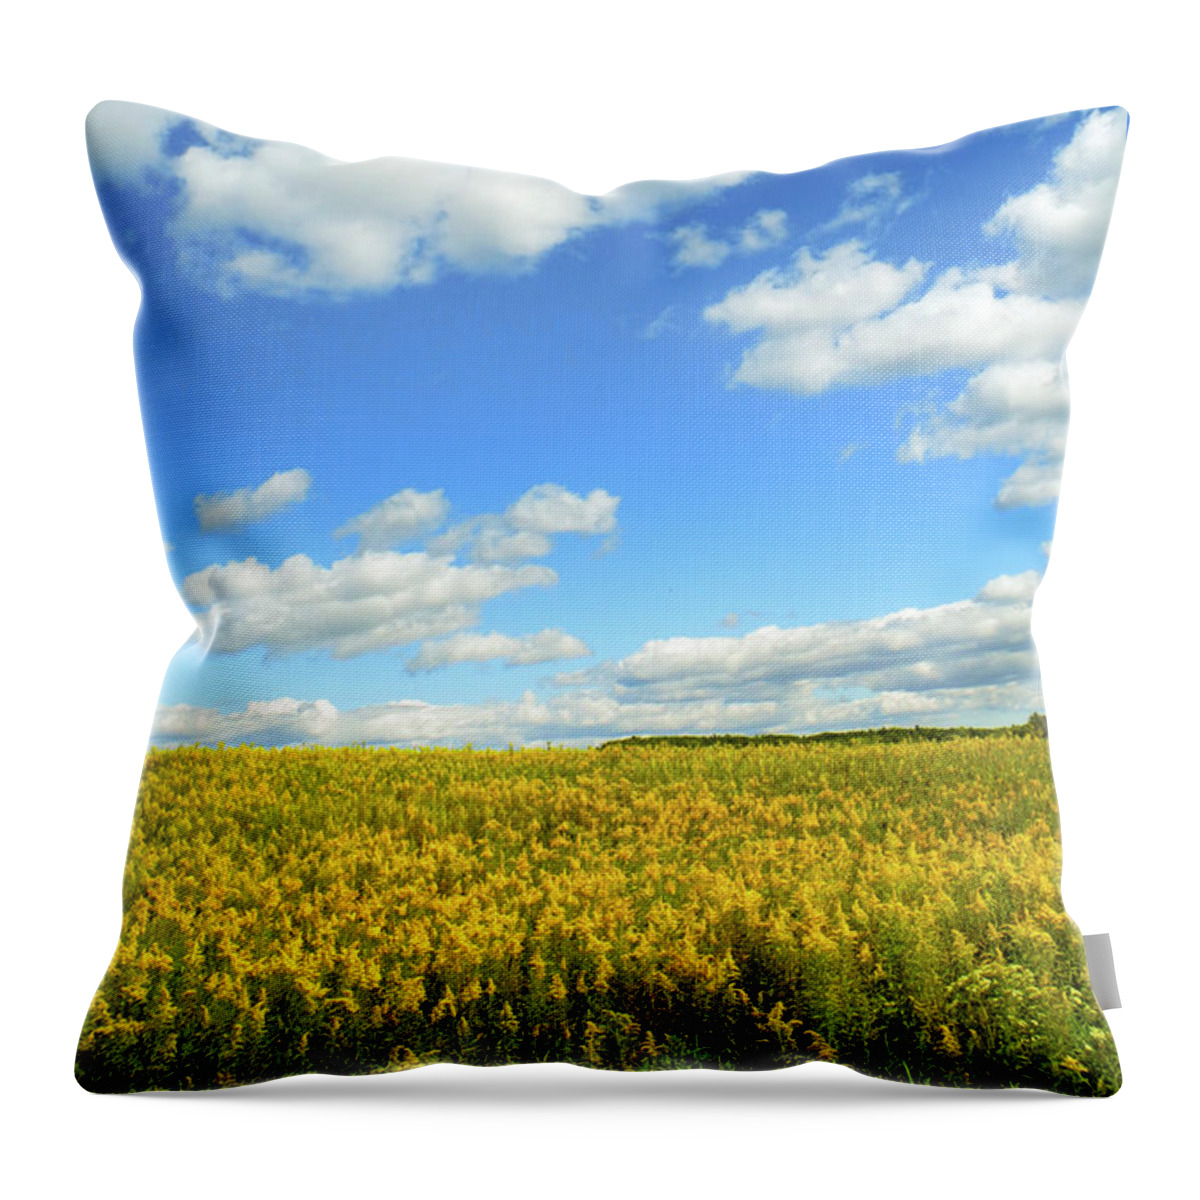 Blue Sky Throw Pillow featuring the photograph Blue Sky And Goldenrod Flowers by Christina Rollo